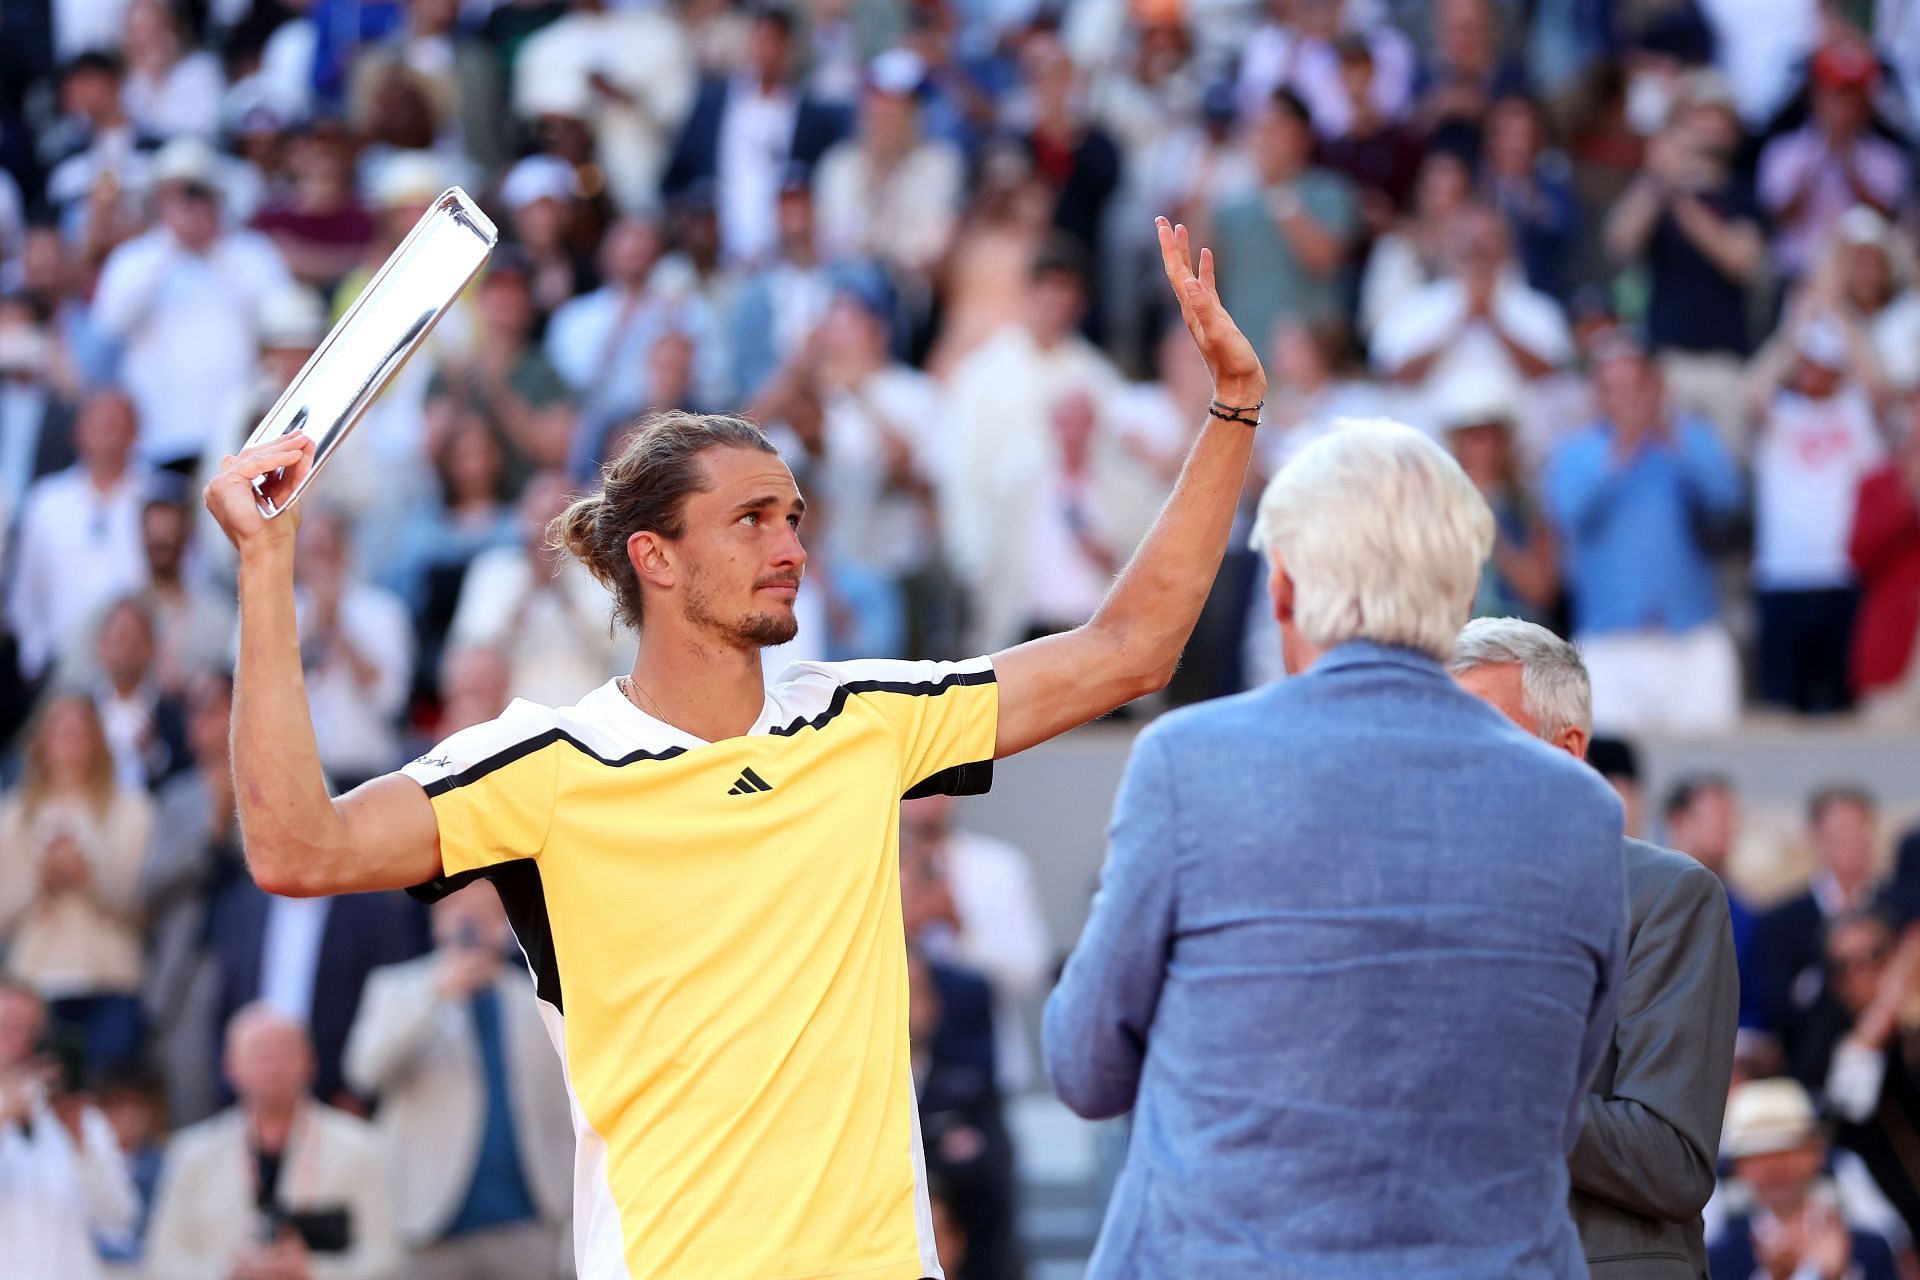 “I did everything I could, fu**, there was some unlucky moments” - Alexander Zverev reflects on his loss to Carlos Alcaraz in French Open final